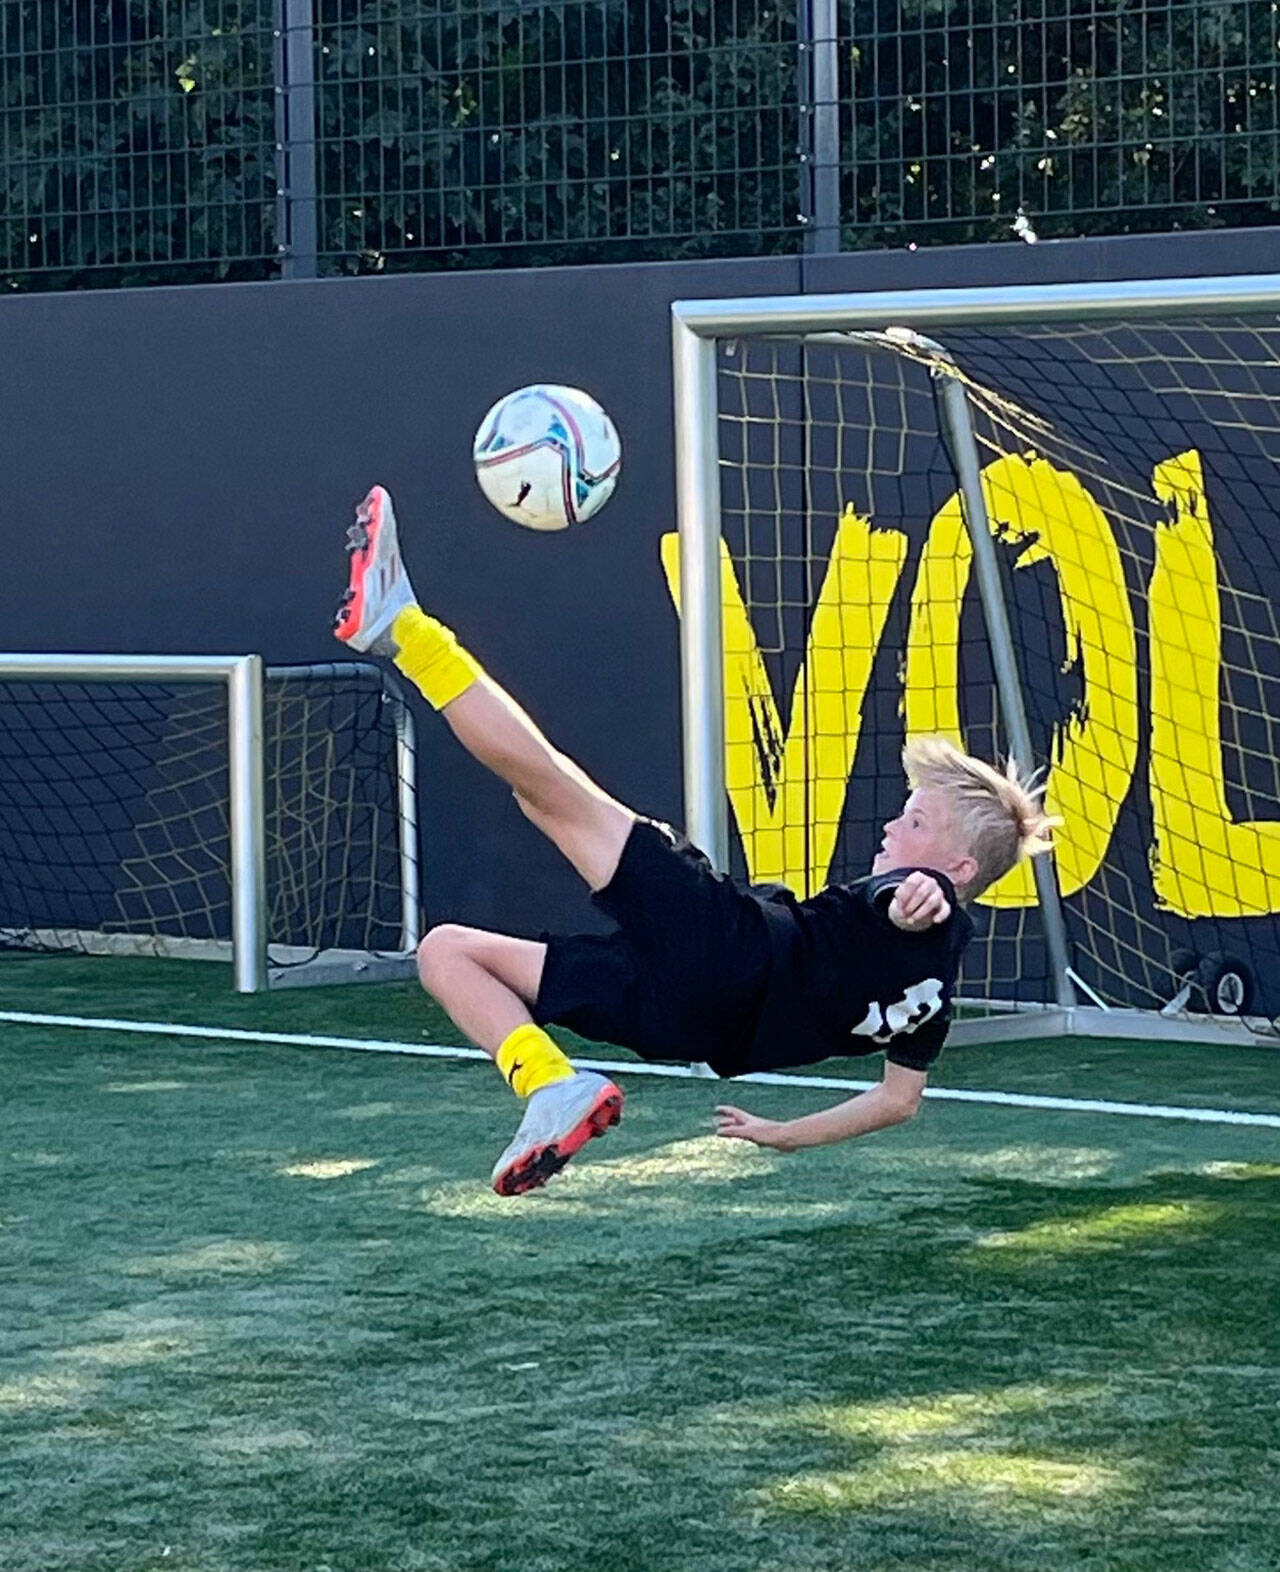 Fynn Holloway, showing his skills at the BvB Academy in Germany. (Michelle Malarney Photo)